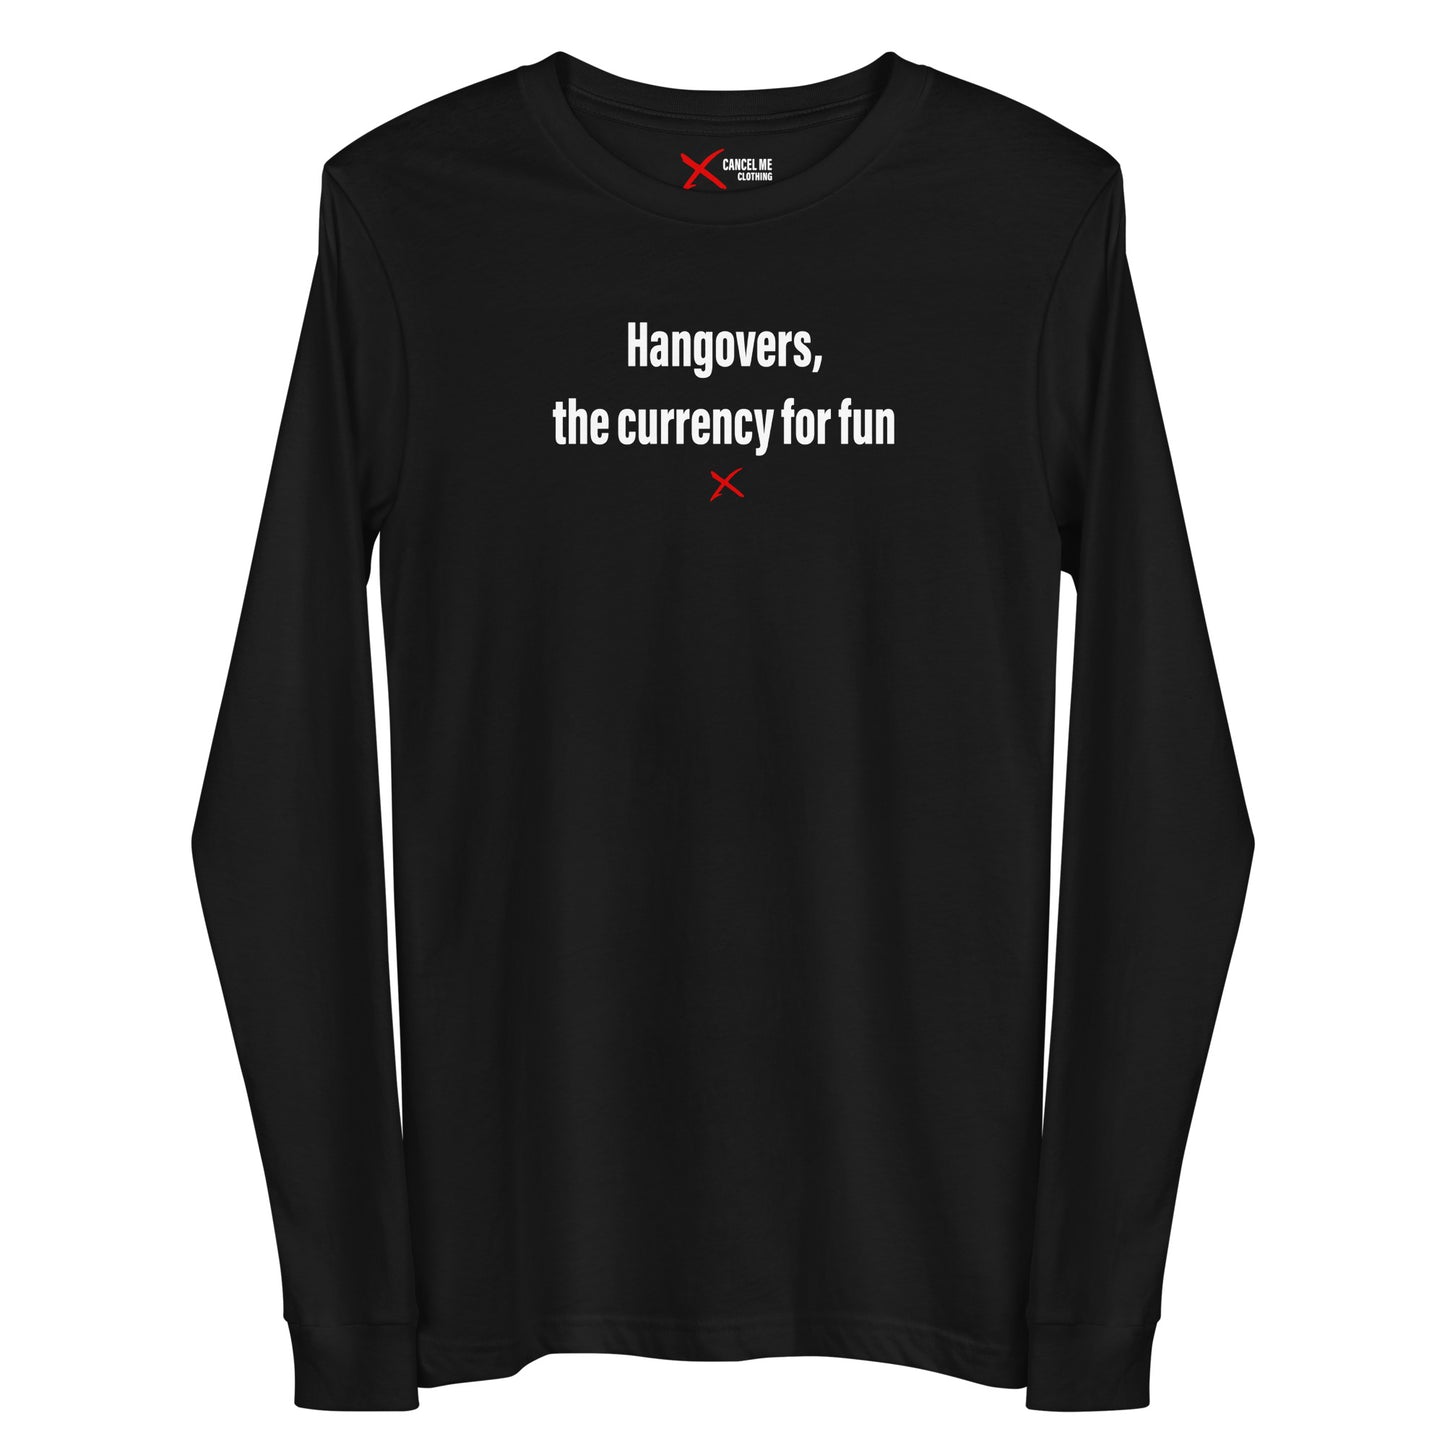 Hangovers, the currency for fun - Longsleeve